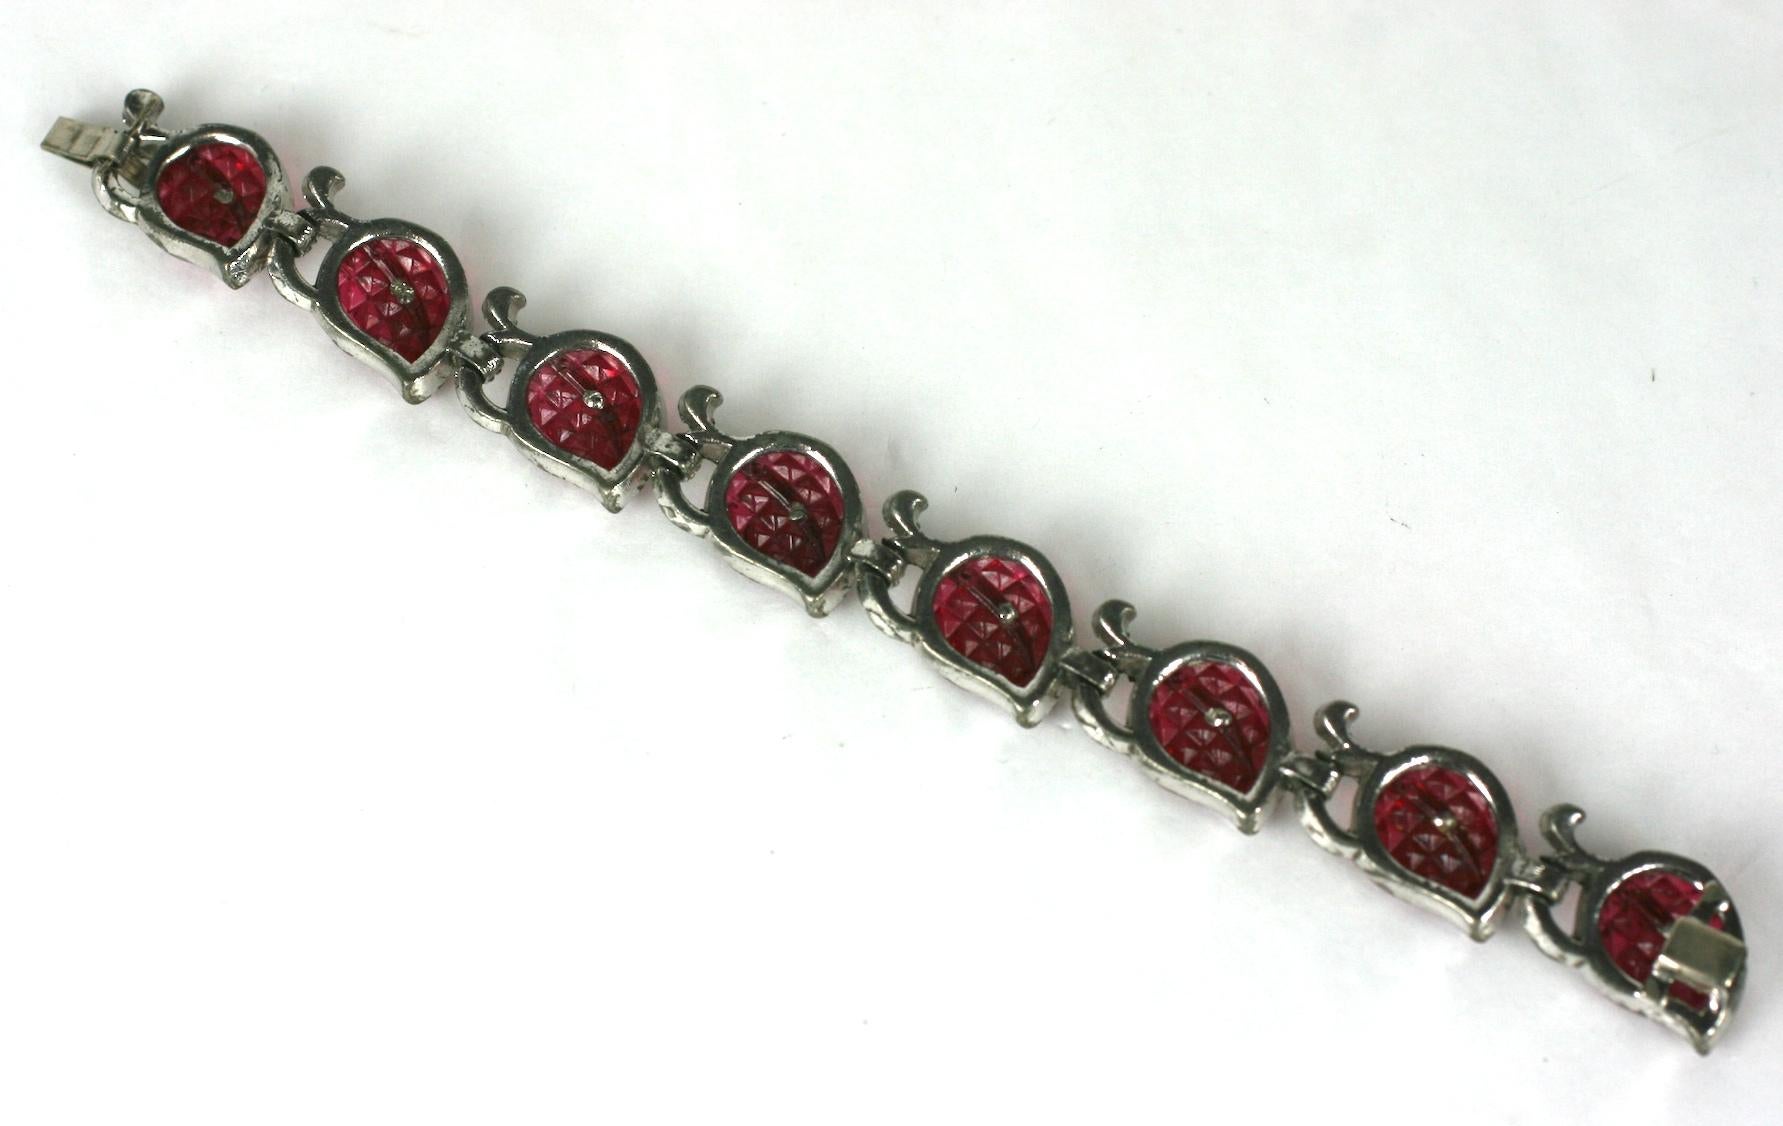 Trifari Alfred Philippe Invisibly set KTF ruby leaf Art Deco bracelet. The articulated links composed of eight invisibly set faux ruby glass leaves with crystal pave set in rhodium plated base metal.
This bracelet is  characteristic of patented KTF